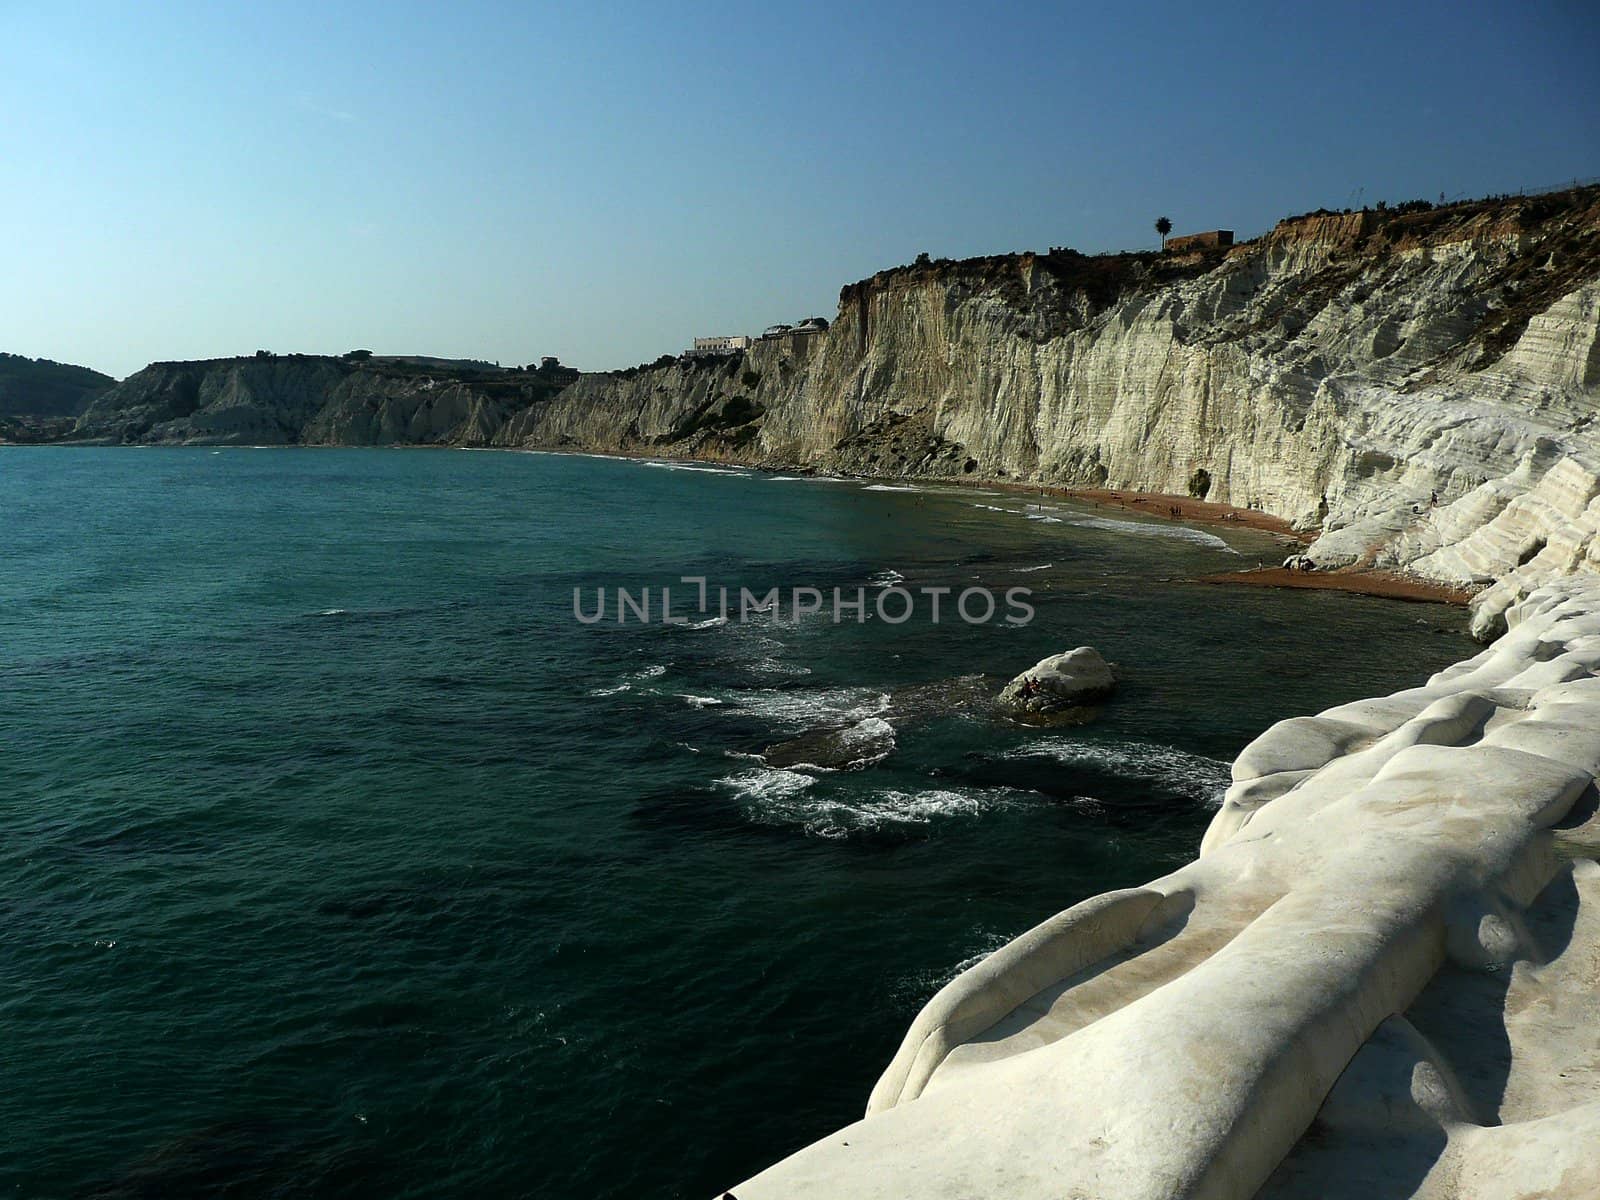 The Rocky White Cliffs named Stair of the Turks, Sicily, Italy